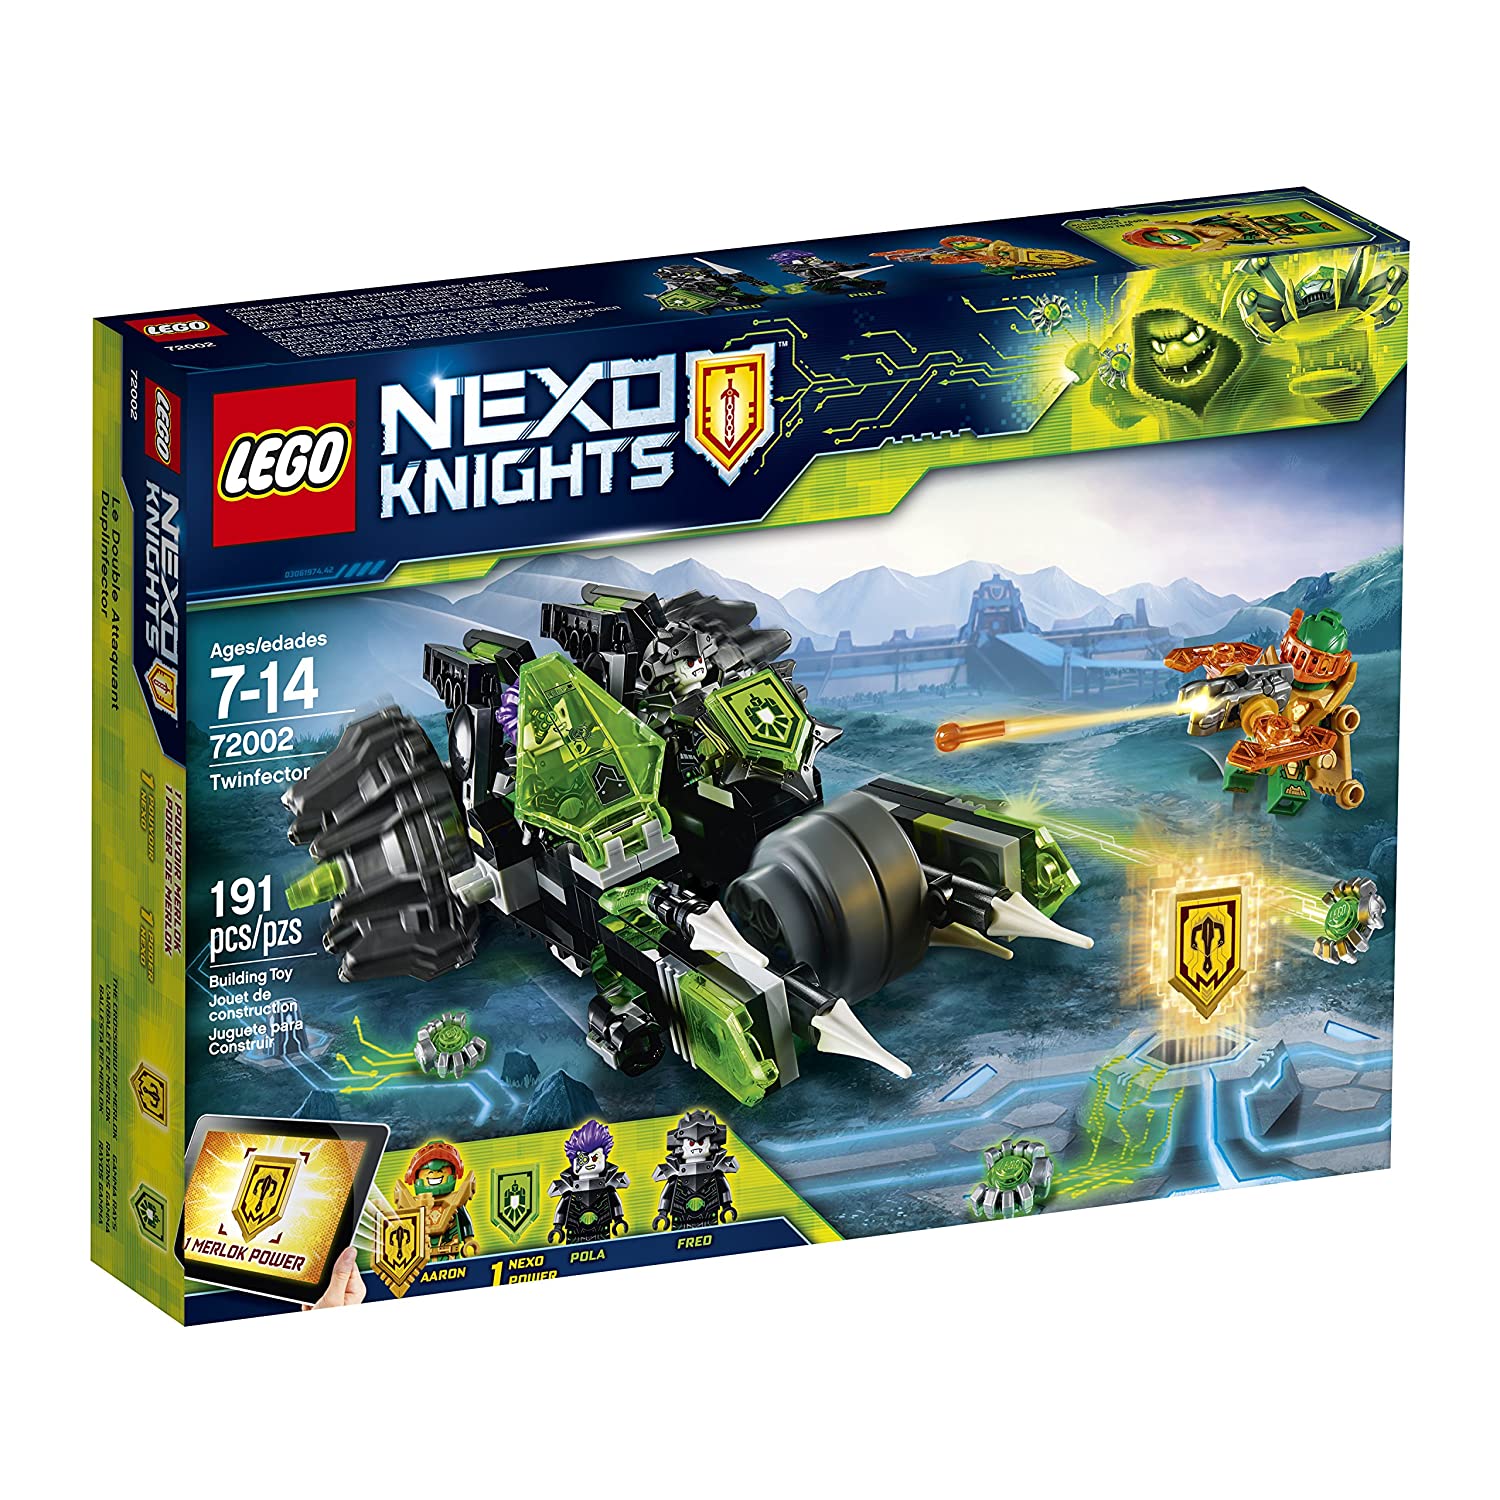 9 Best LEGO Nexo Knights Set 2023 - Buying Guide & Reviews 2